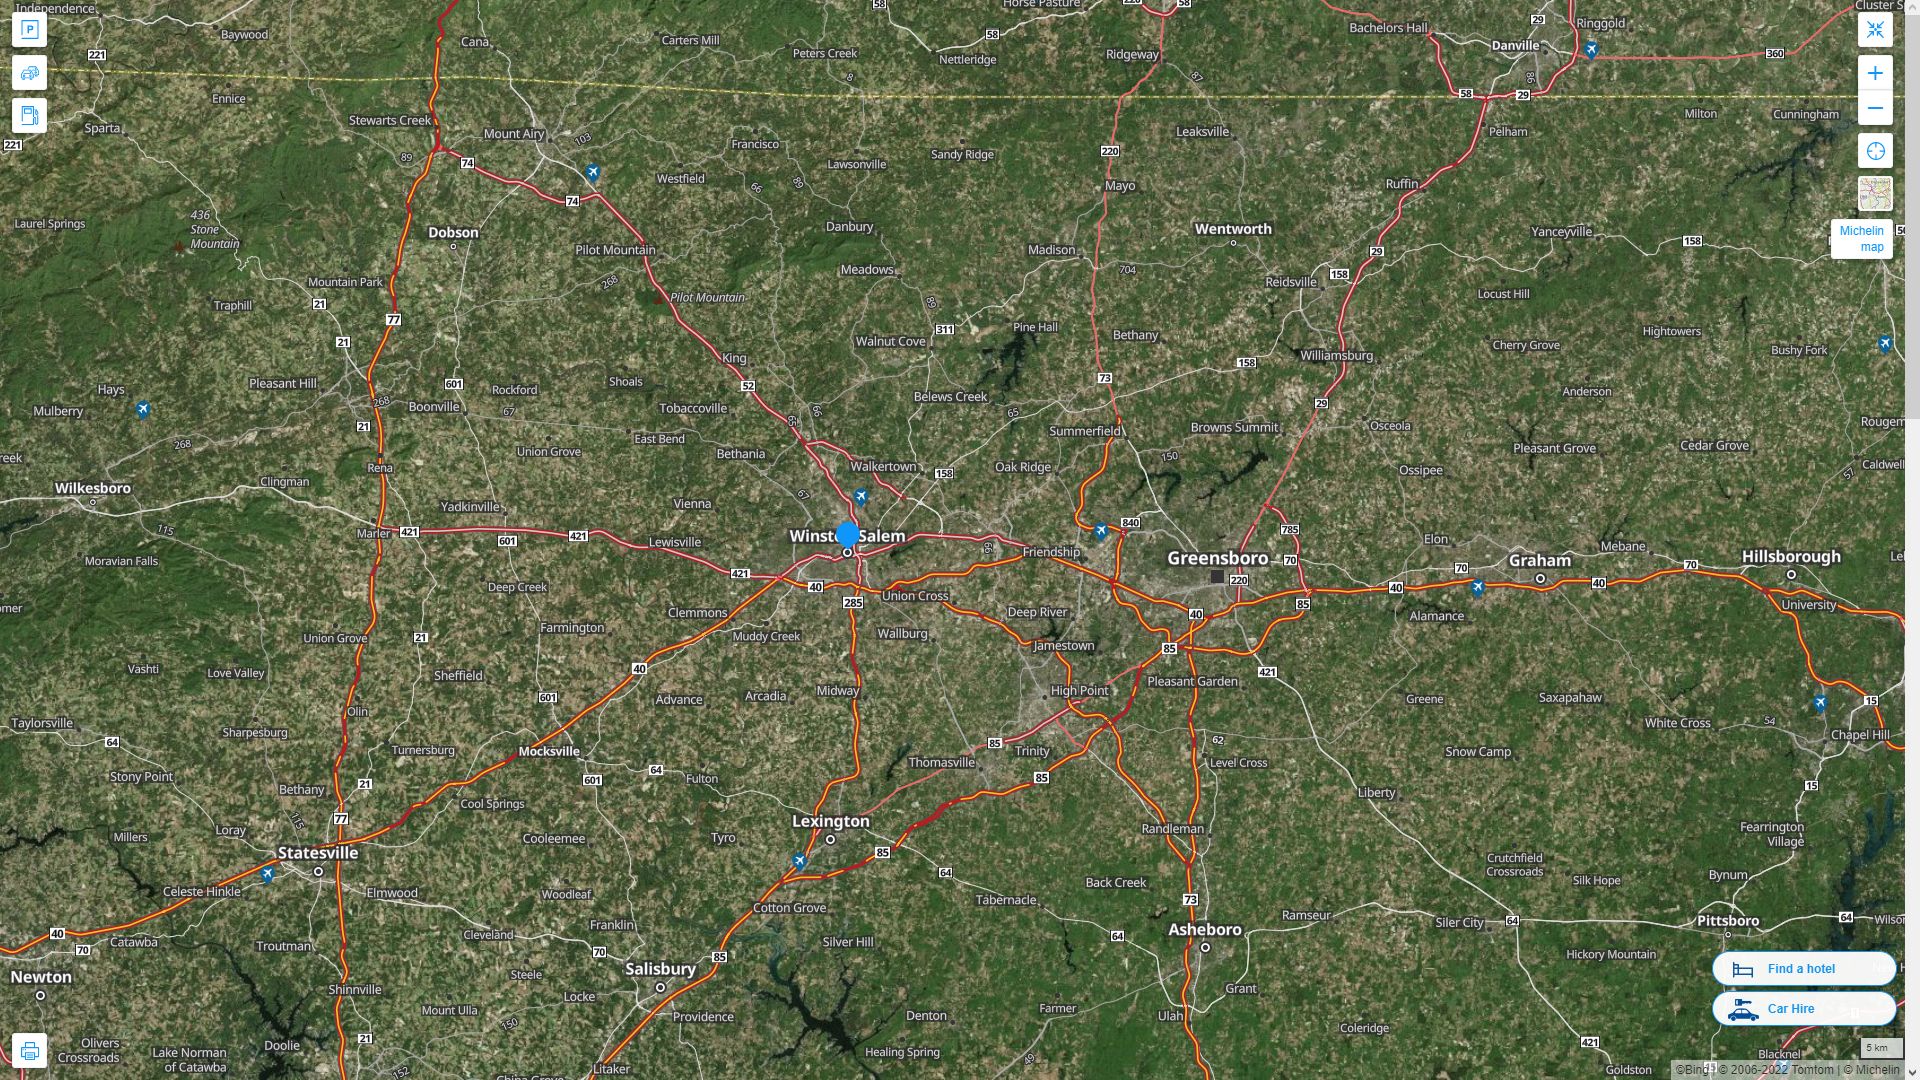 Winston Salem North Carolina Highway and Road Map with Satellite View